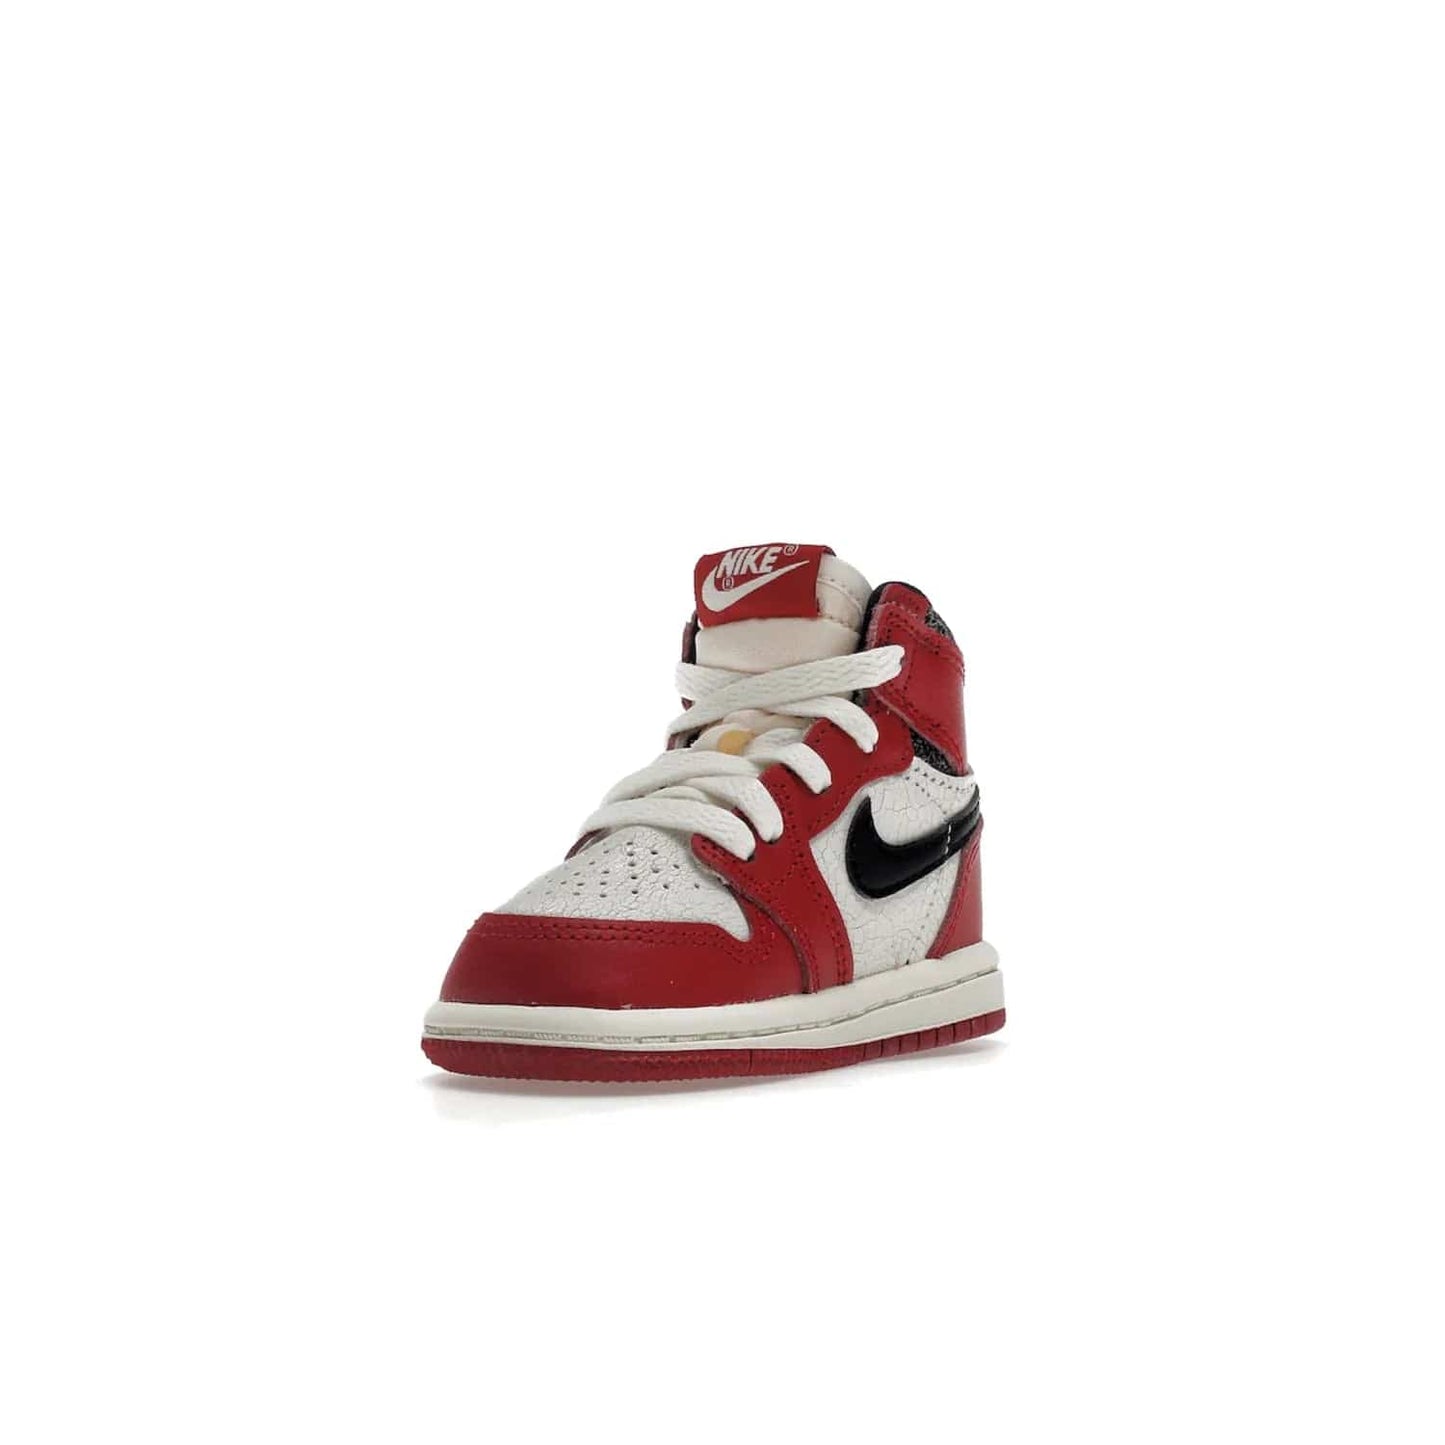 Jordan 1 Retro High OG Chicago Lost and Found (TD) - Image 14 - Only at www.BallersClubKickz.com - Introducing the Air Jordan 1 Retro High OG Lost and Found TD – a vibrant combination of 4 colors: muslin, varsity, sail and black. Featuring a crackled leather upper and AIR units for comfort and a signature Wings logo, these retro shoes add comfort and style for your little ones at $70. Get your pair before 19th December 2022!